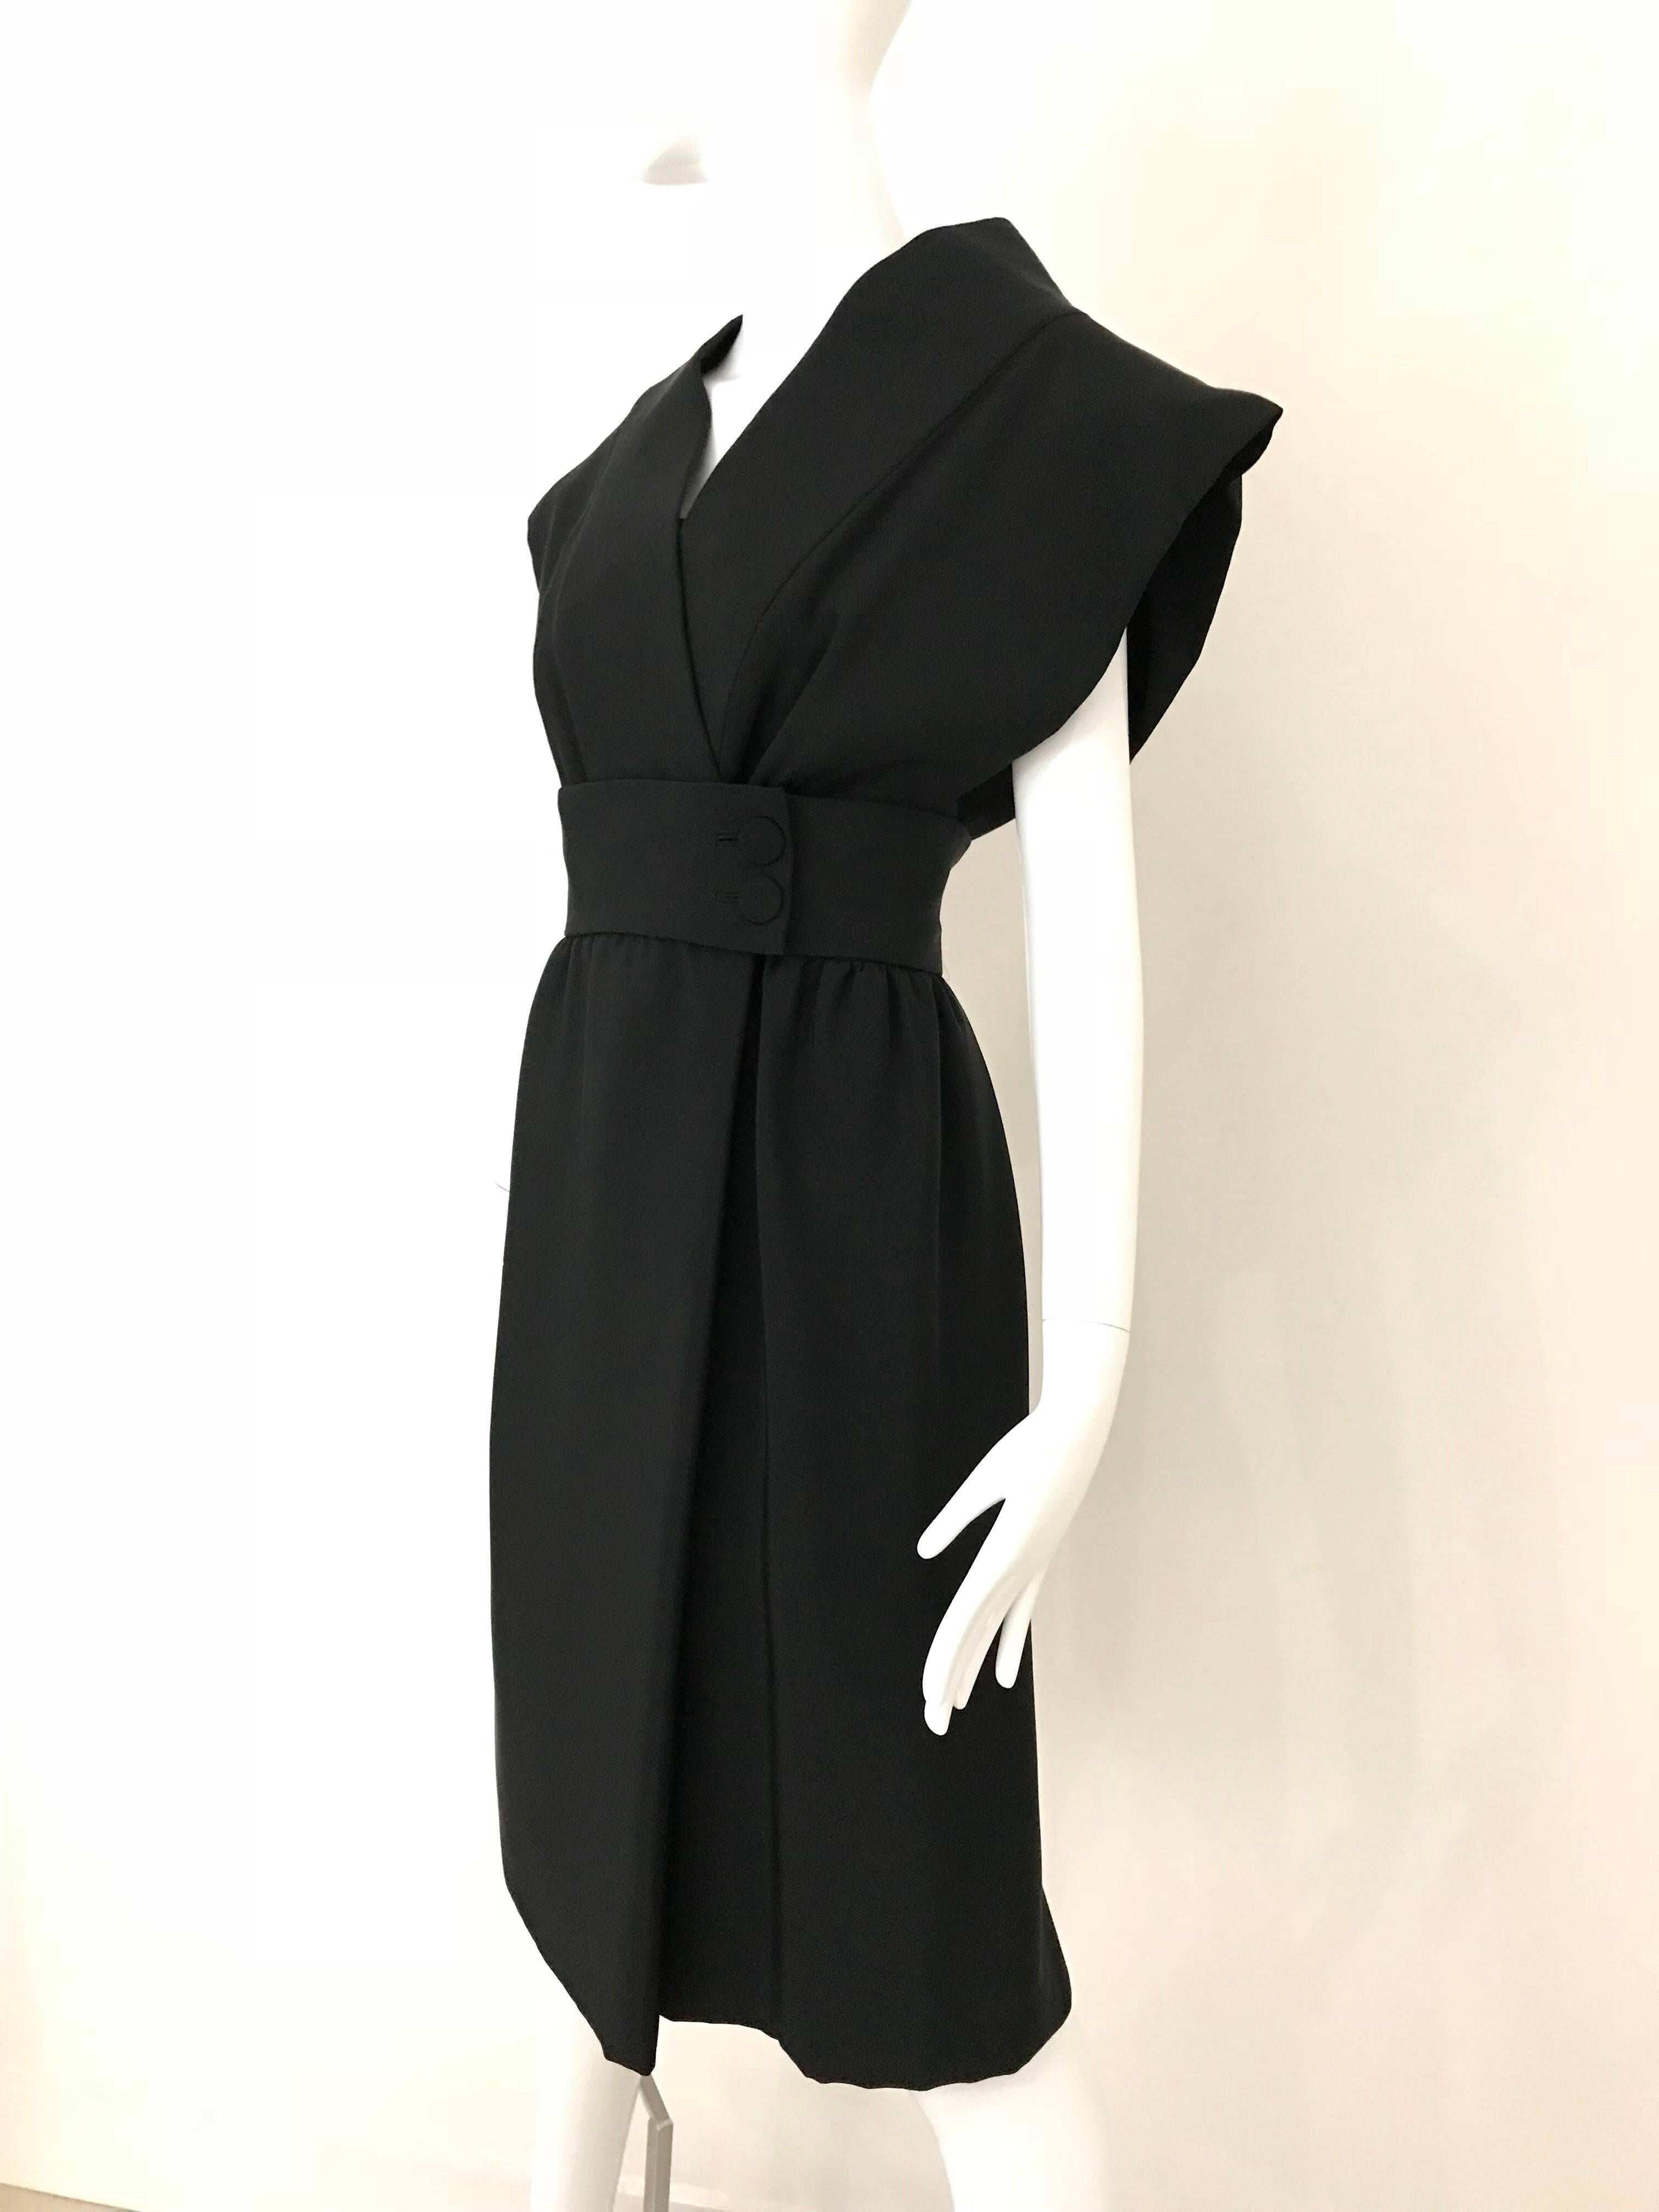 Important Norman Norell Couture black Silk Obi Cocktail Dress. 
The museum of FIT will exhibit Norman Norell clothing in February. 

Fit size 4/ Small
Bust: 34-36  inches
Waist: 26 inches